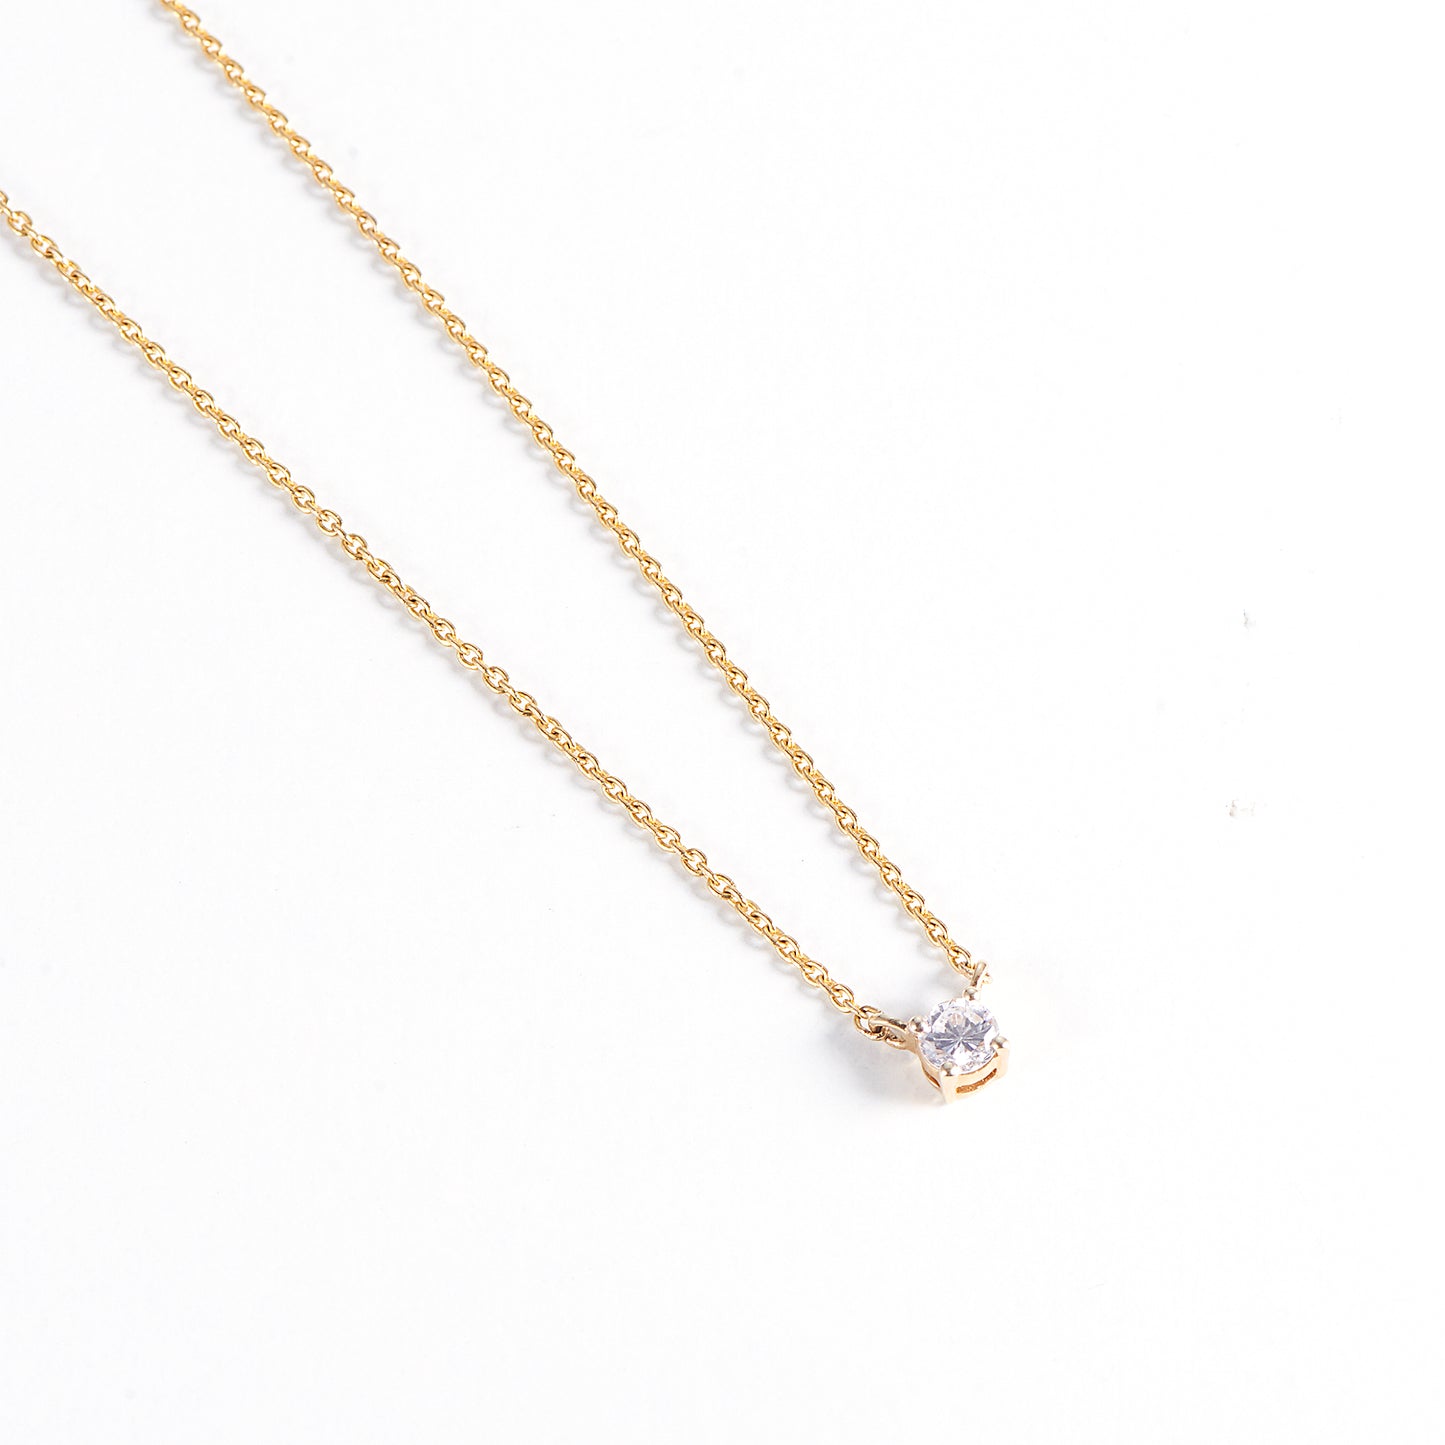 SOLITAIRE NECKLACE WITH 0.10 crts DIAMONDS